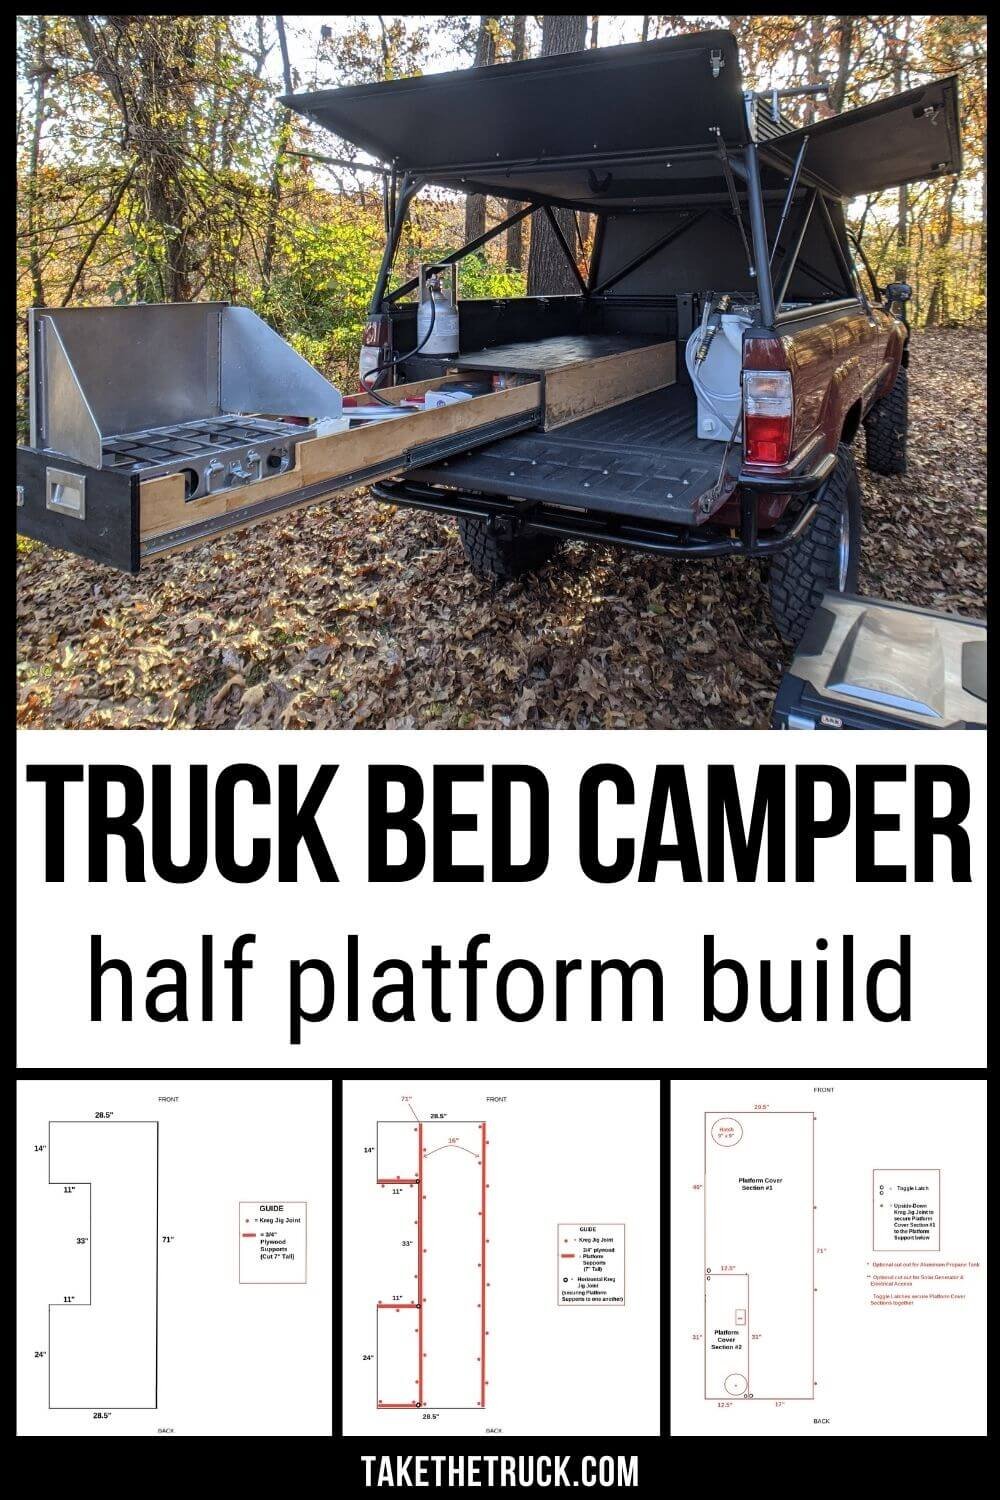 This post gives truck bed camping platform plans and build instructions. This diy truck bed sleeping platform has a sliding truck drawer for more storage when you go camping in your pickup!